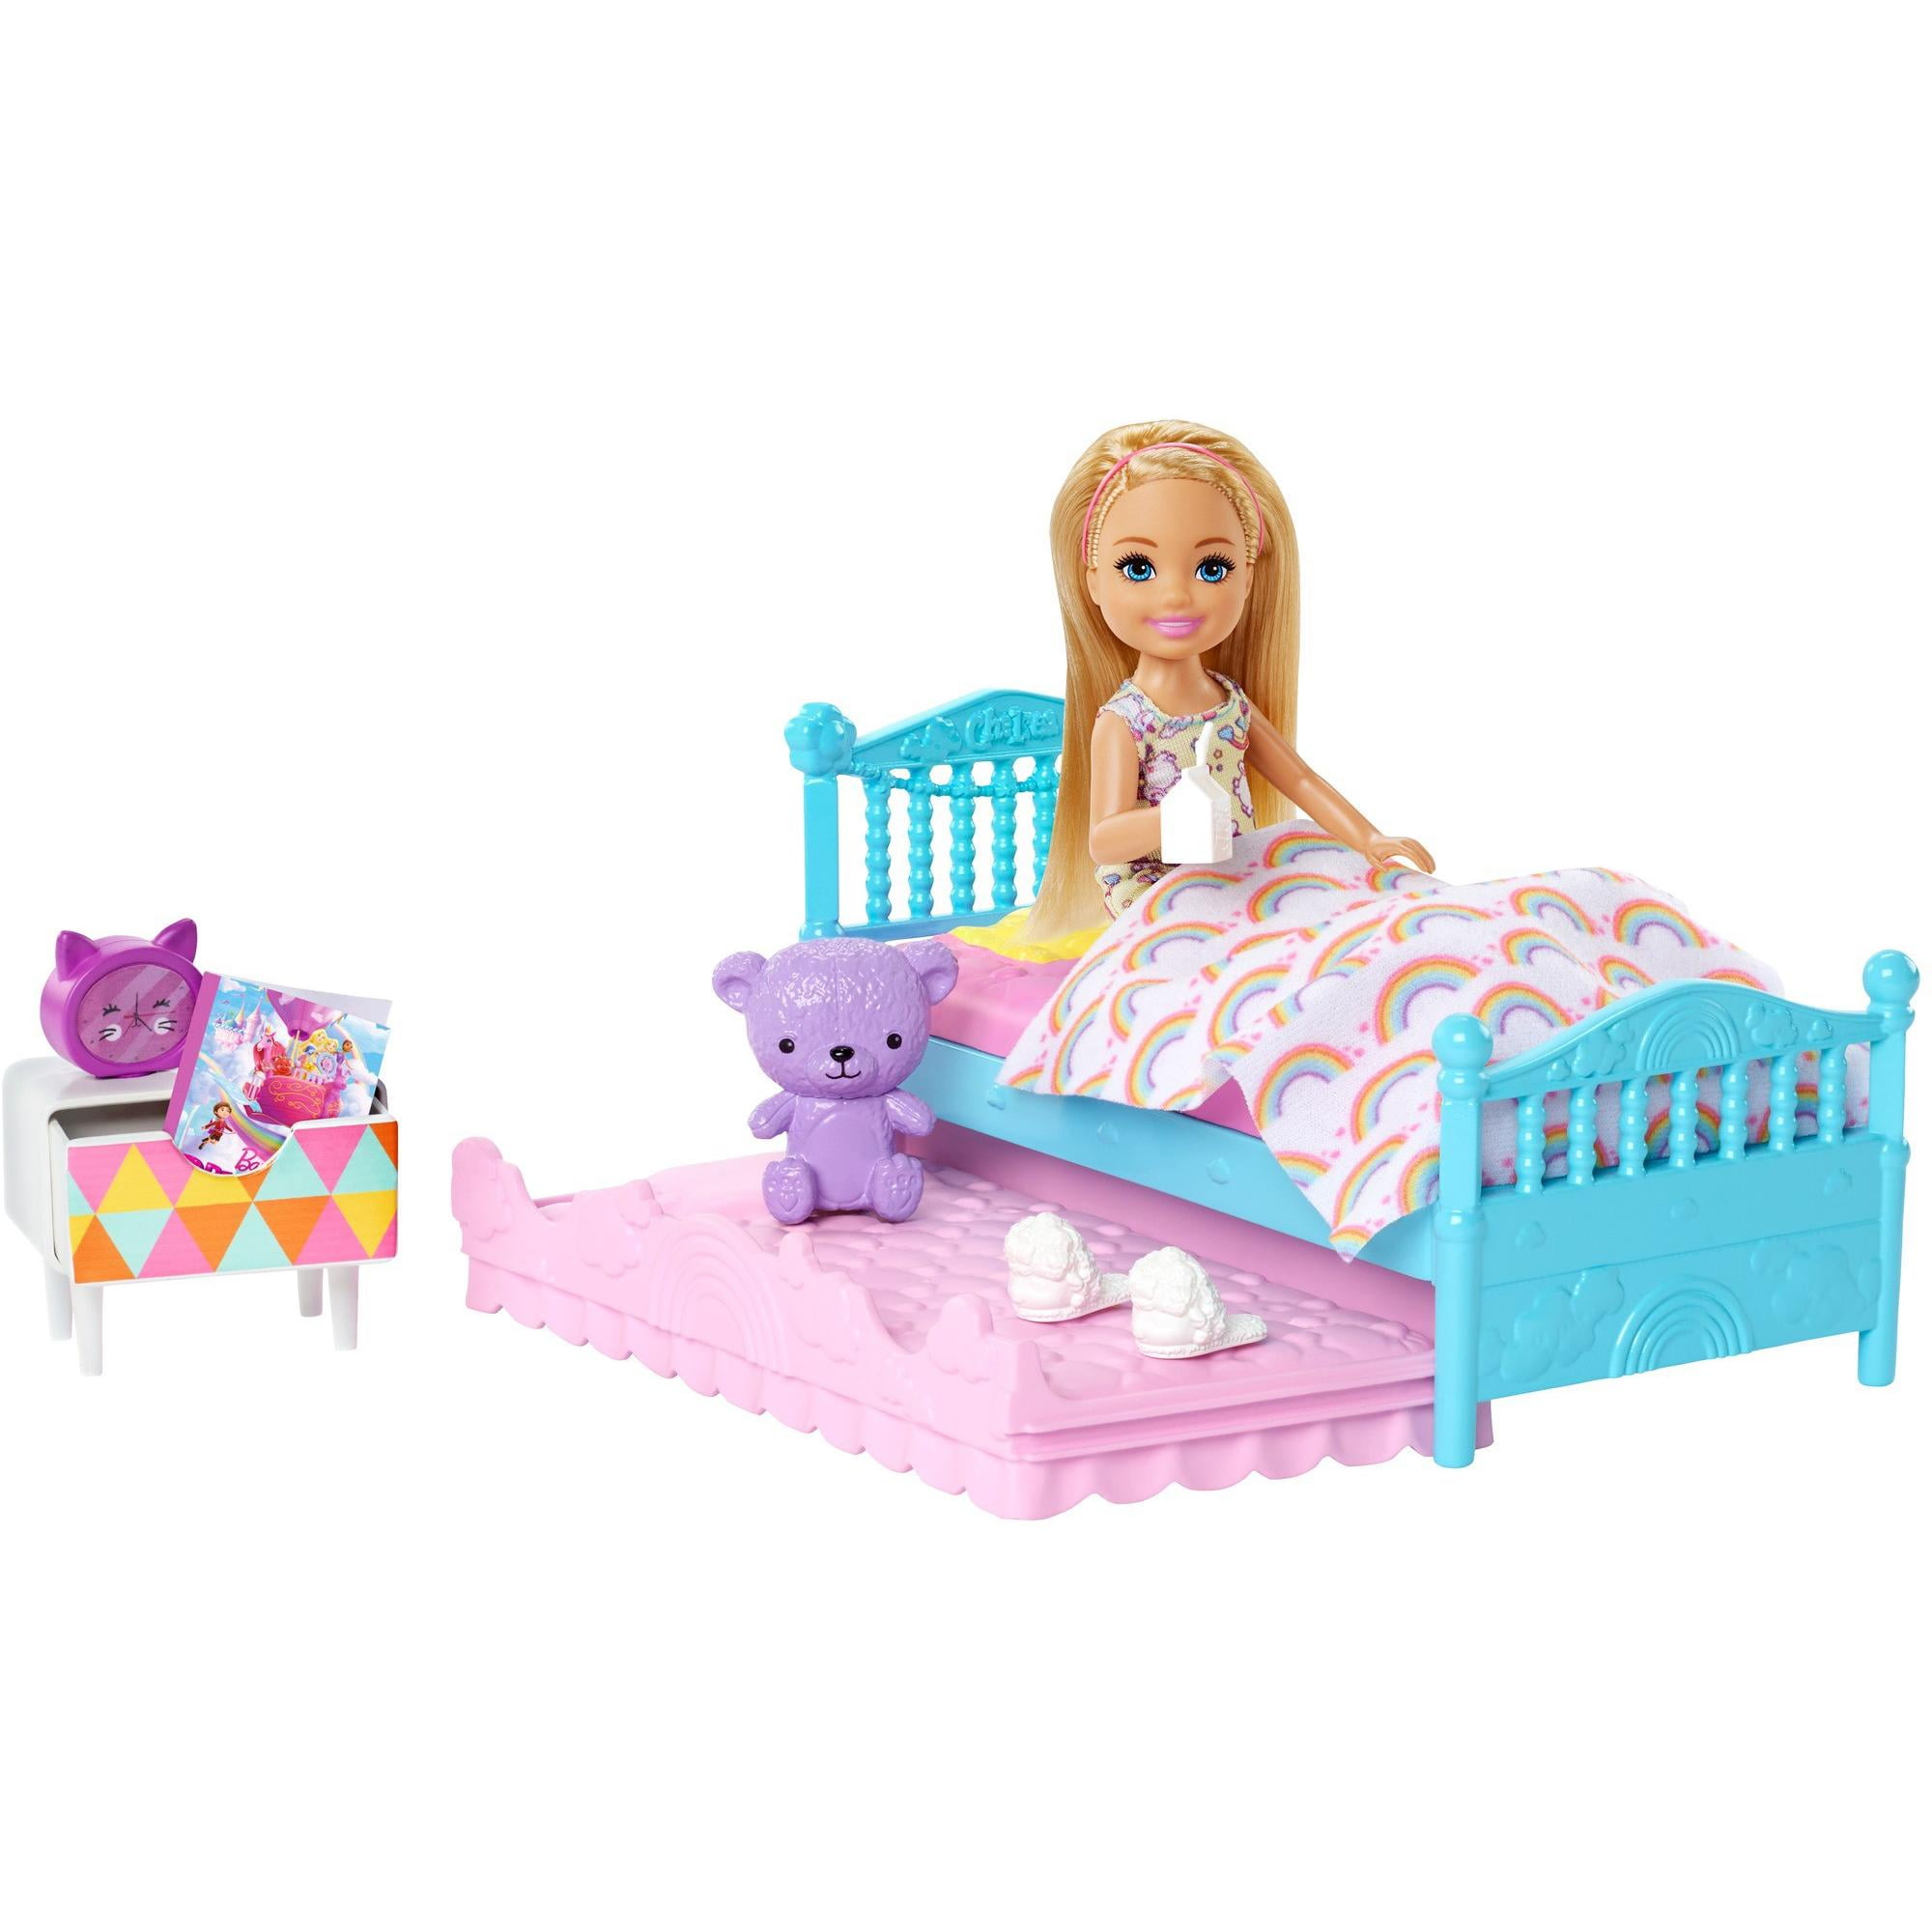 BARBIE CLUB CHELSEA BEDTIME DOLL and PLAYSET DREAMTOPIA FXG83